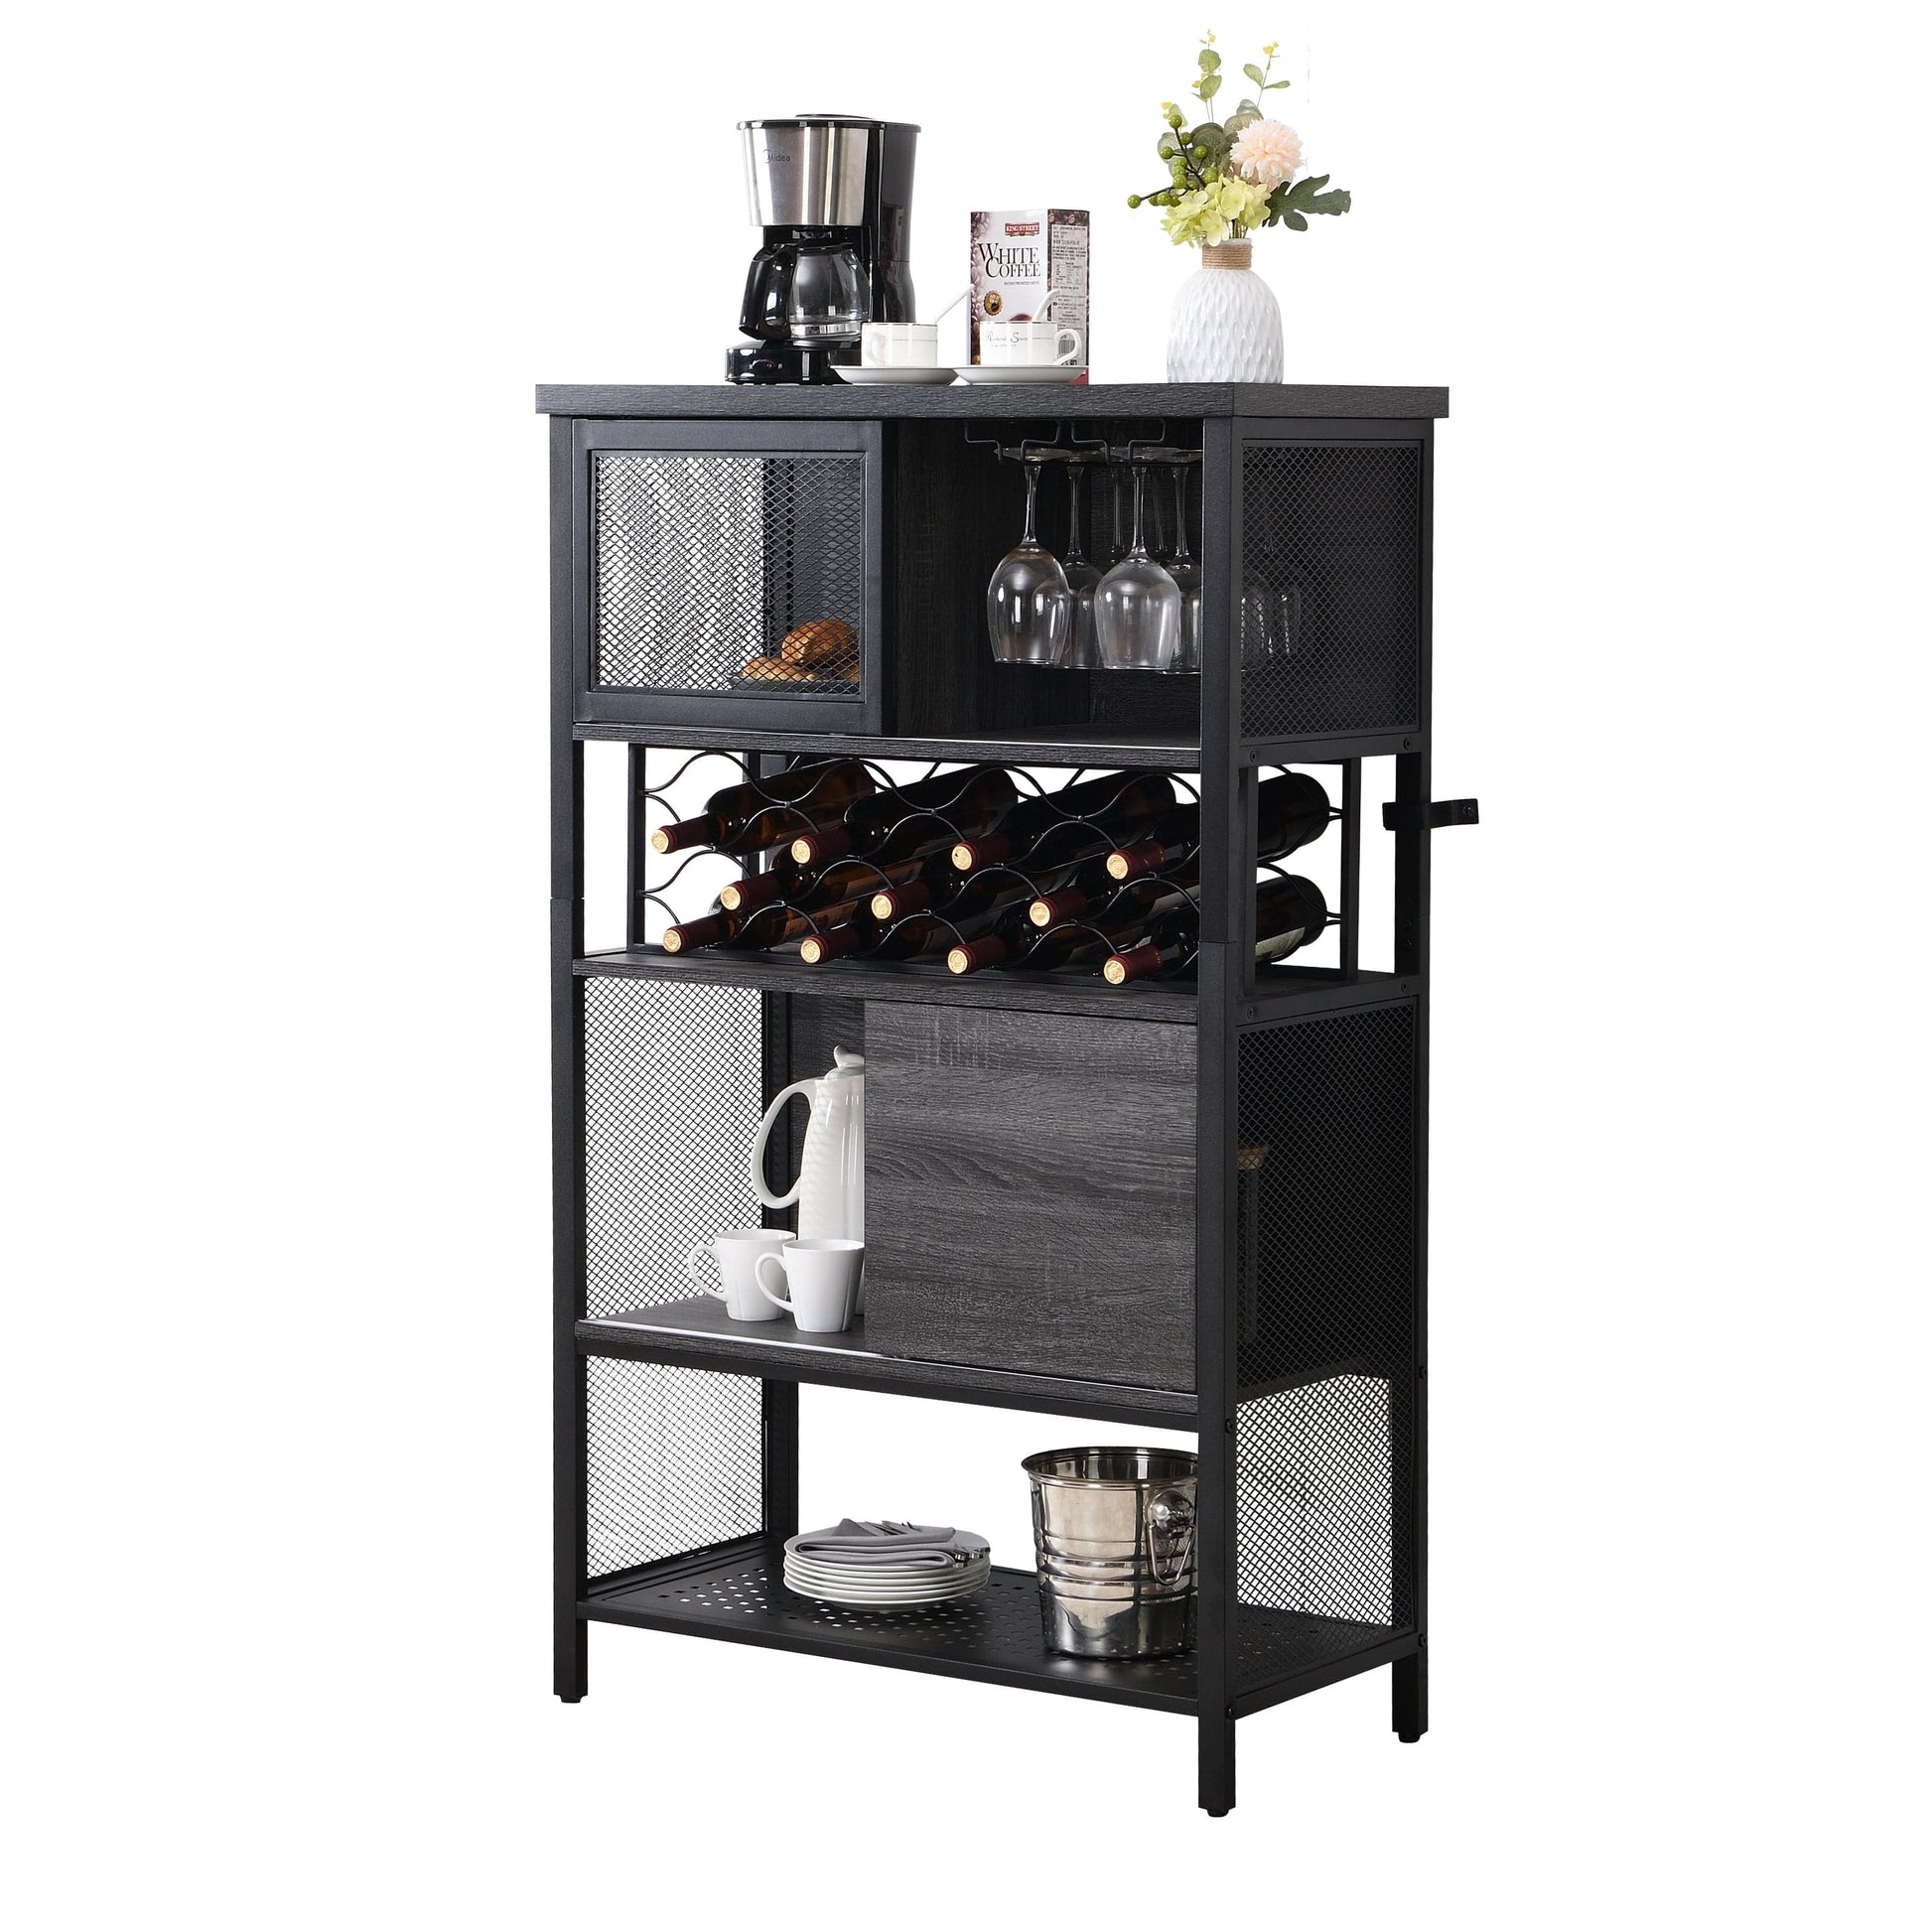 1st Choice Furniture Direct Storage Cabinet 1st Choice Elegant Metal Wood Bar Cabinet with Wine Rack and Holder